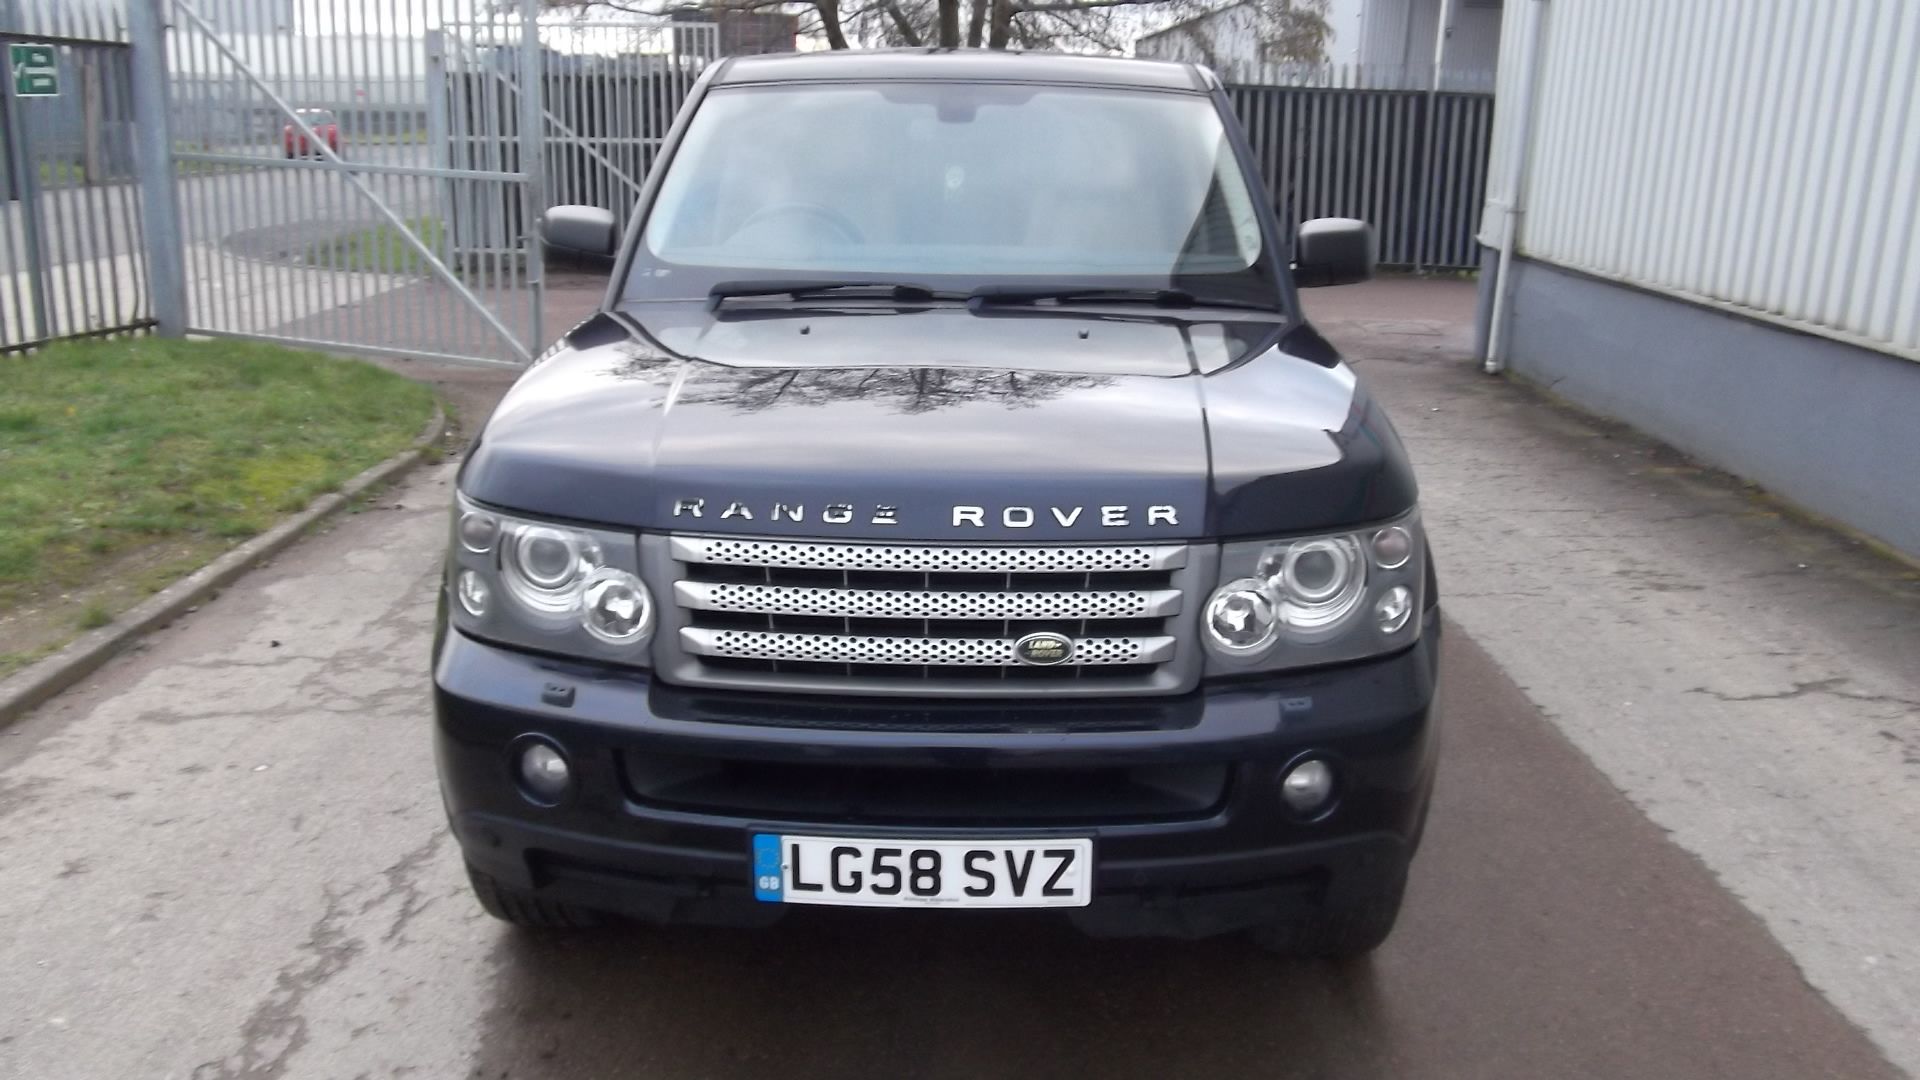 2008 Land Rover Range Rover Sp Hse 2.7 Tdv6 A 5Dr SUV - CL505 - NO VAT ON THE HAMMER - Location: Cor - Image 4 of 15